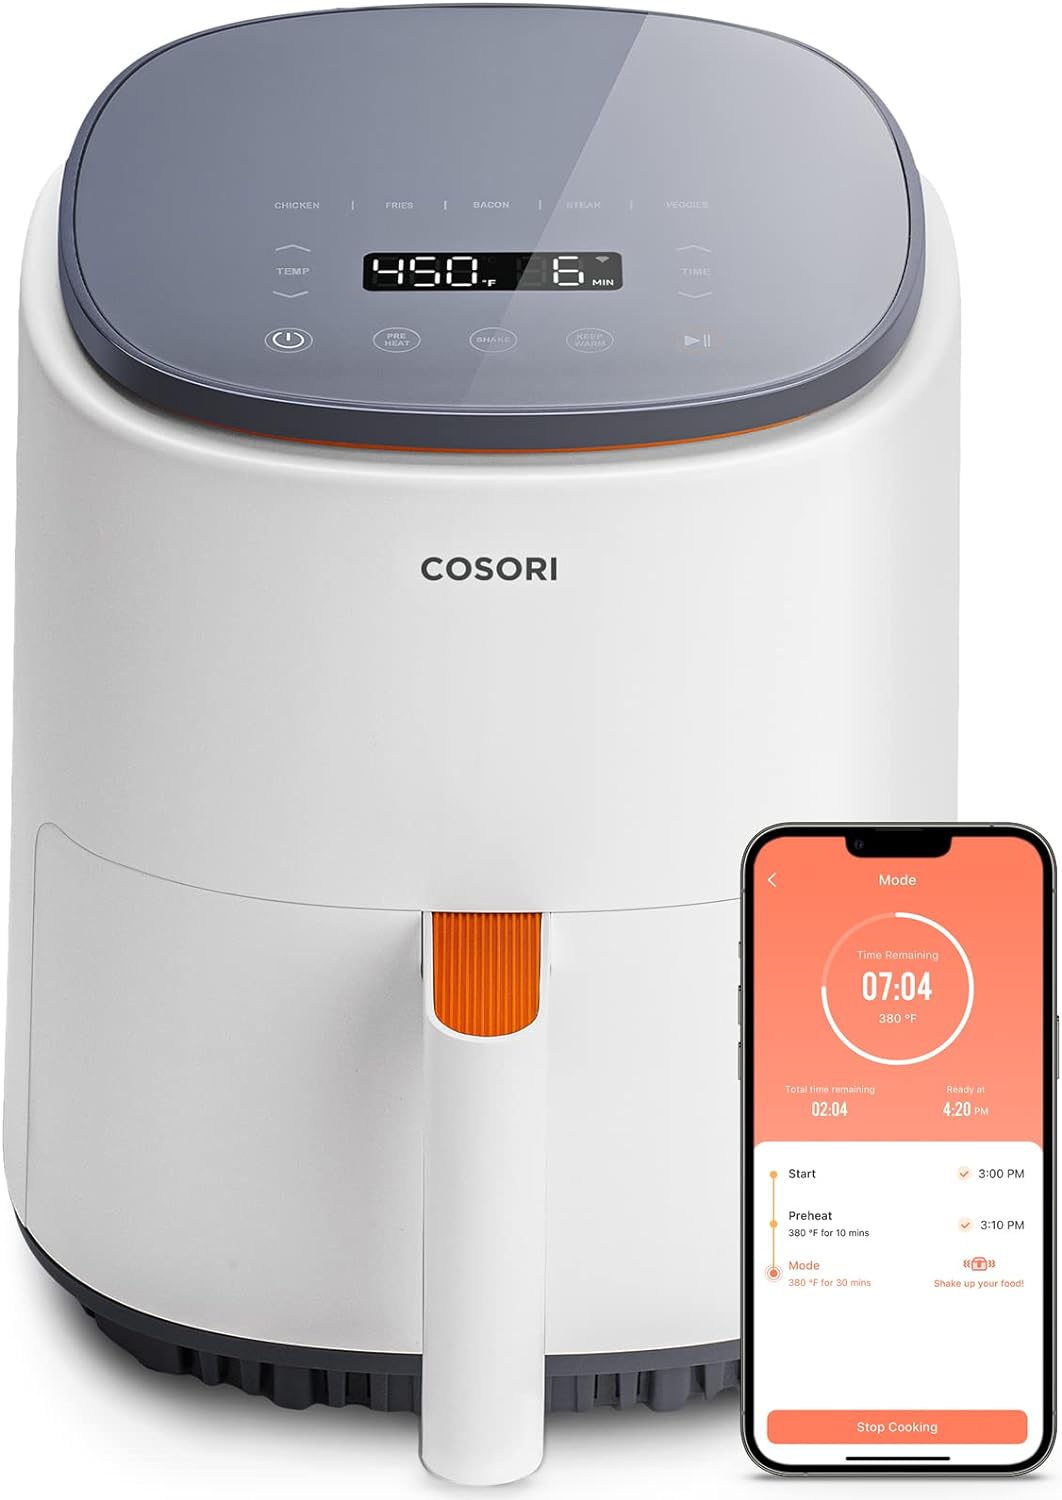 COSORI Air Fryer 4 Qt, 7 Cooking Functions Airfryer, 150+ Recipes on Free App, 97% less fat Freidora de Aire, Dishwasher-safe, Designe